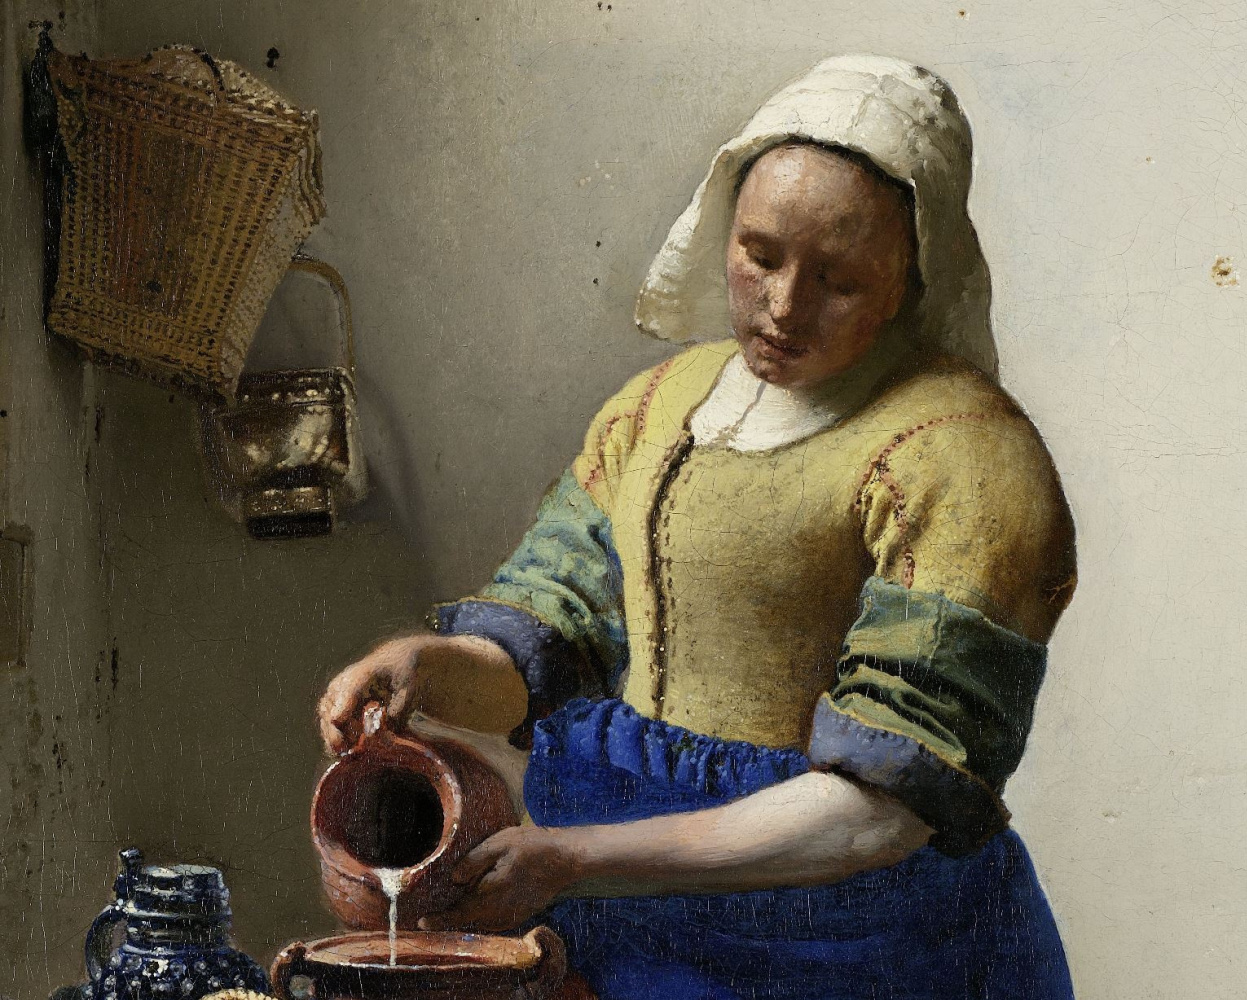 A third of Vermeer's surviving oeuvre is on display at the Louvre